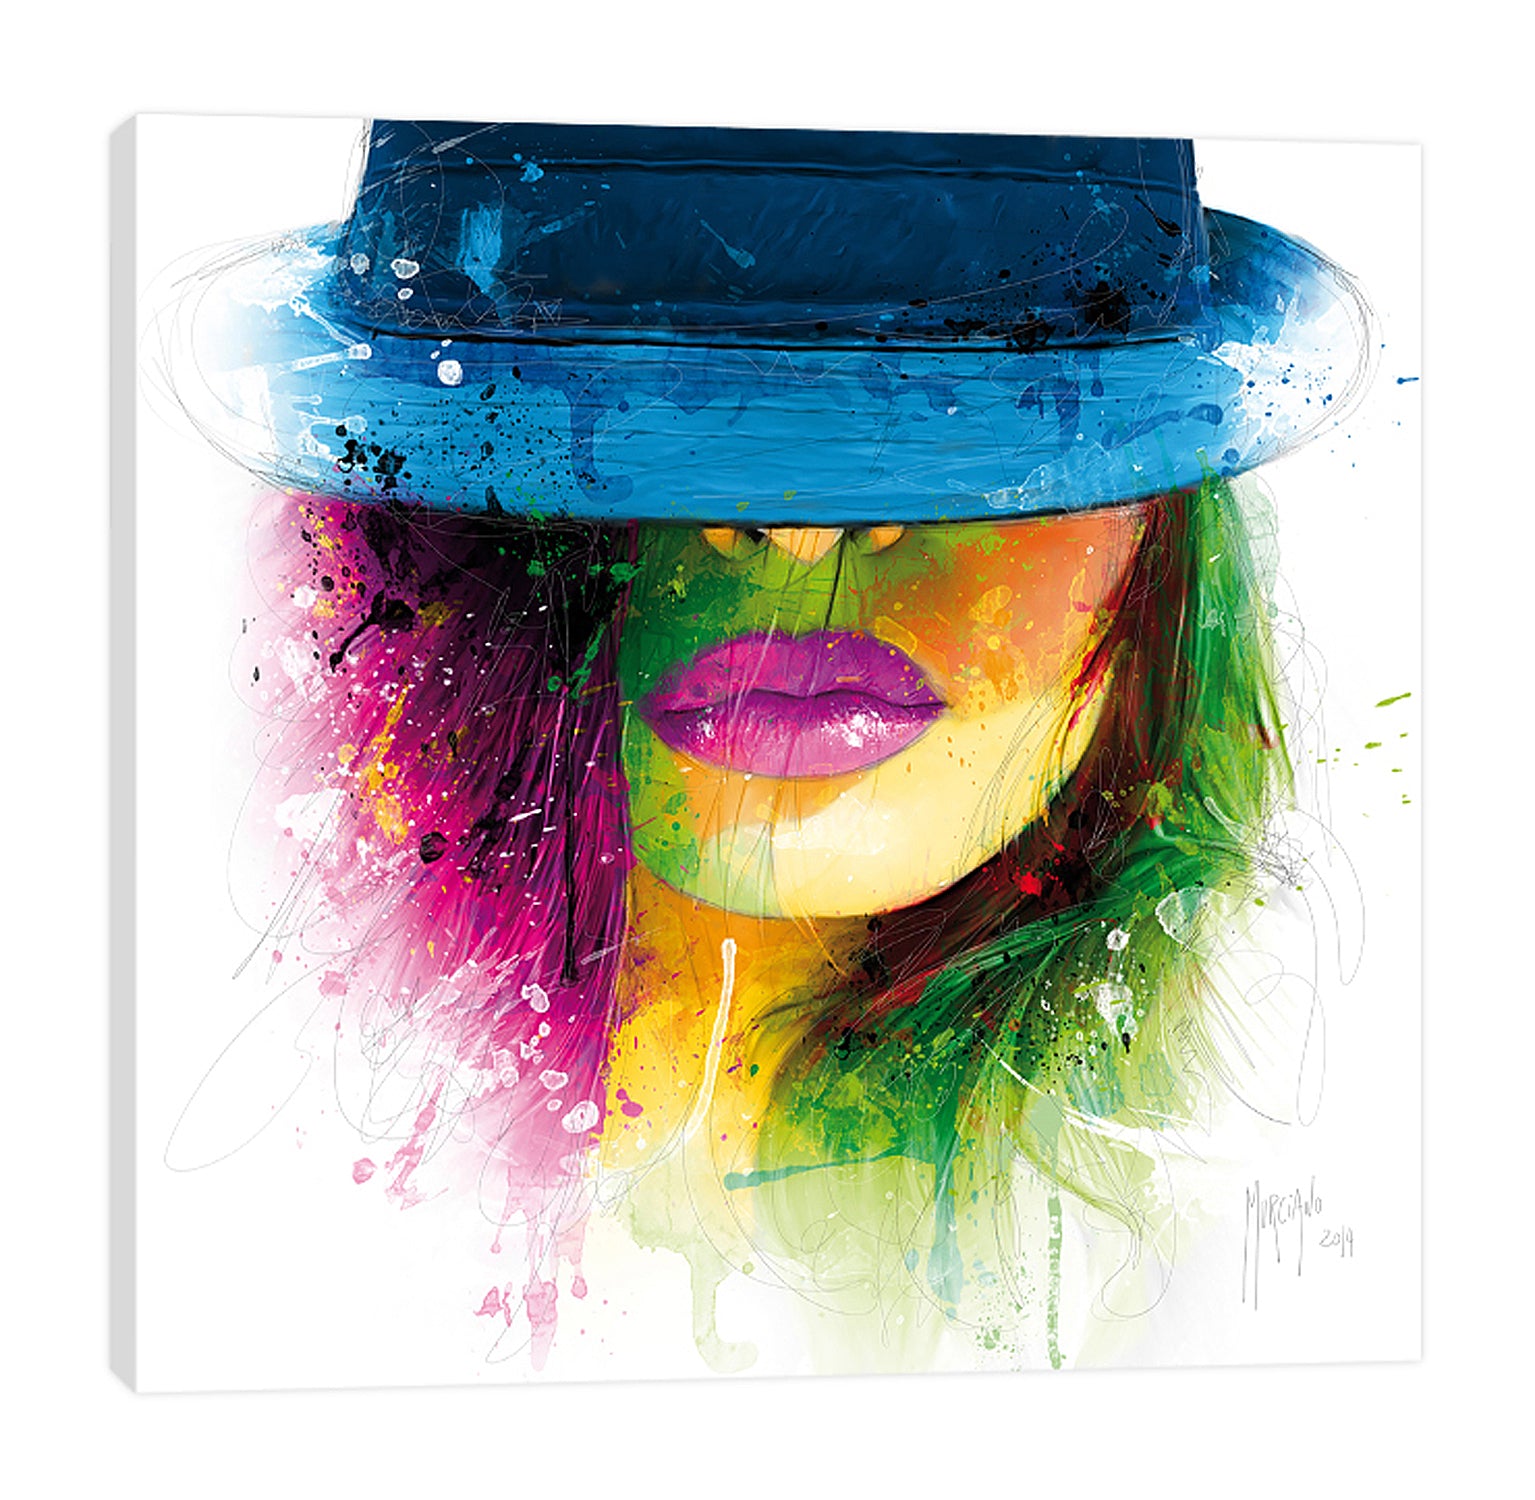 Patrice-Murciano,Modern & Contemporary,People,Fashion,woman,lady,lines,ombre,splatters,eyes,eyeshadow,fashion,hat,Navy Blue,Pale Green,Green,Mist Gray,White,Black,Gray